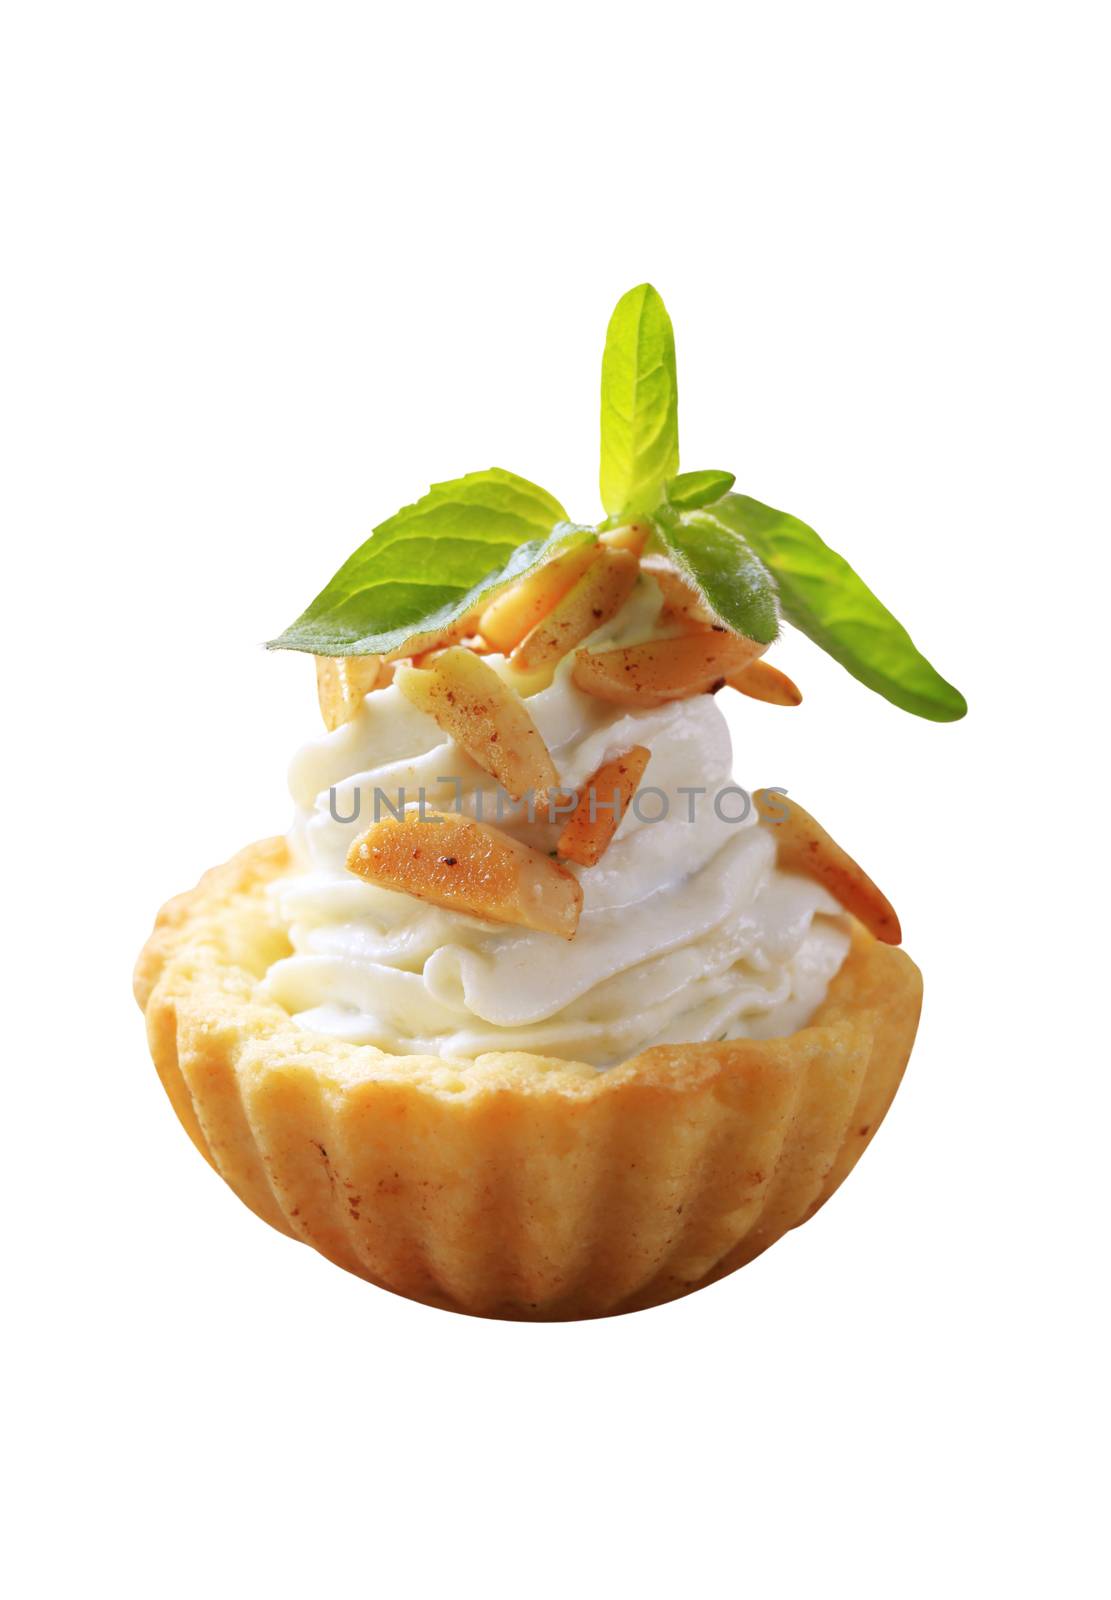 Canape - Tart shell with savory spread filling topped with roasted almonds